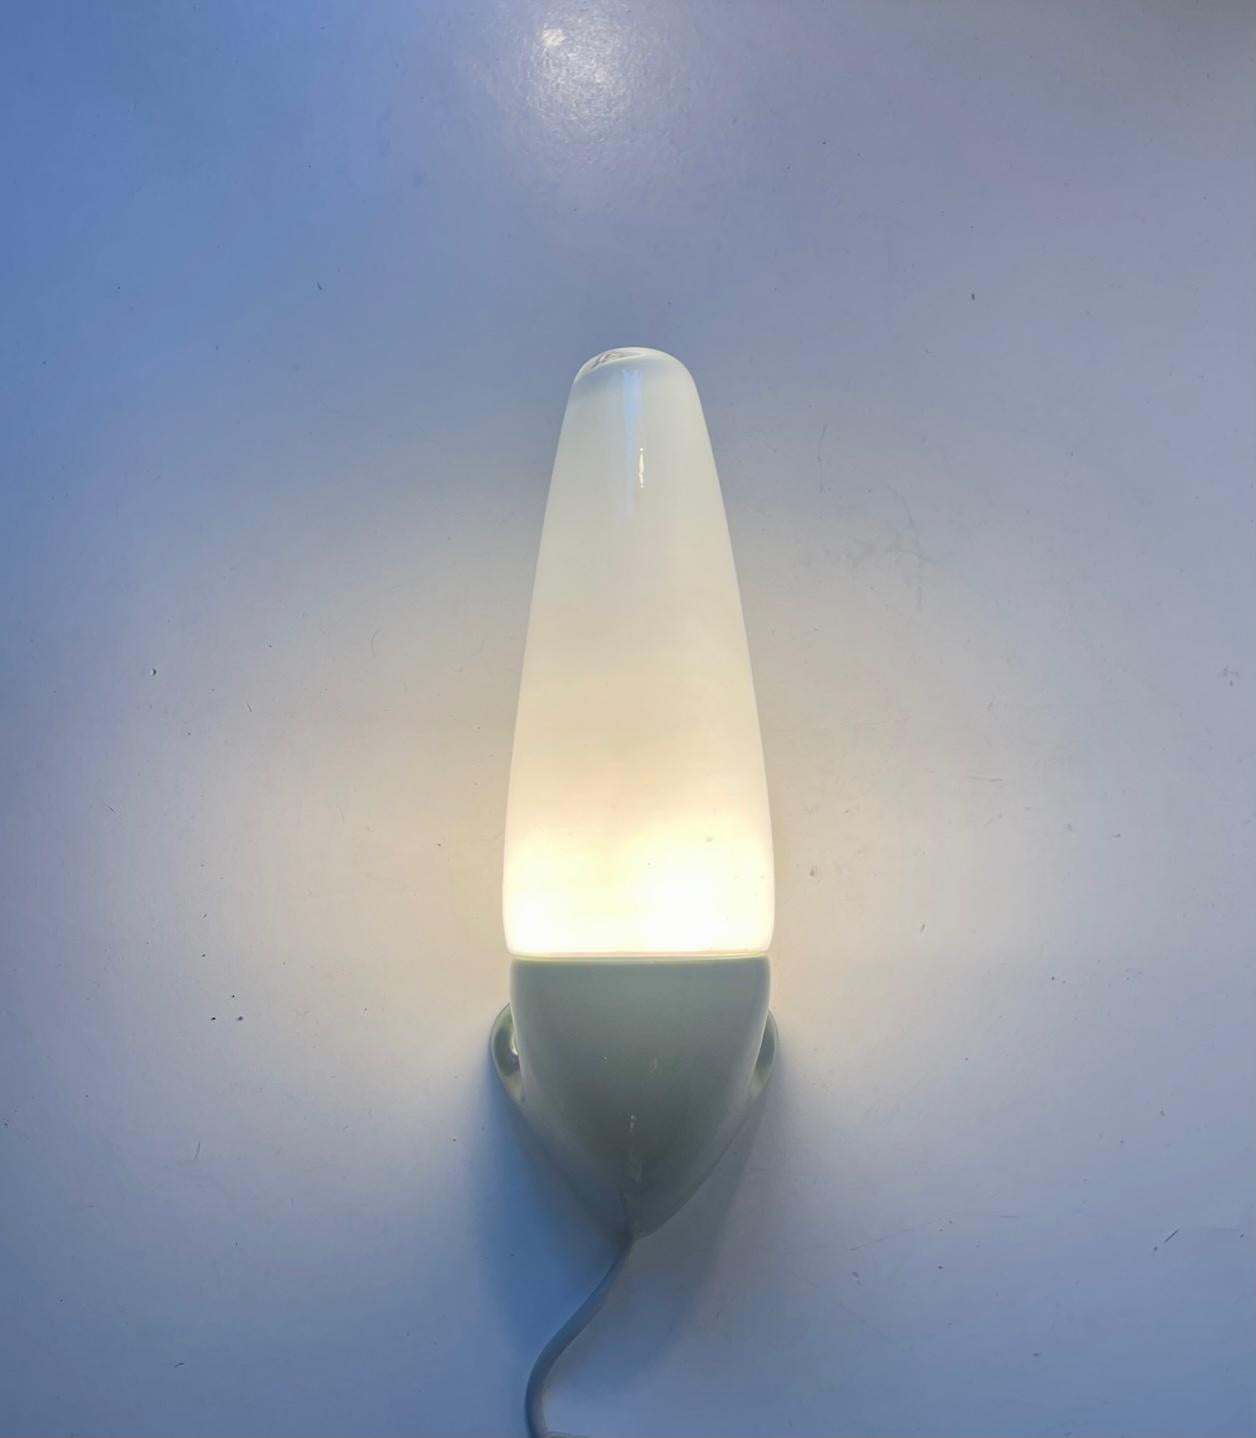 Wall sconce suitable as bathroom or outdoor lighting. Designed by Prince Sigvard Bernadotte for the swedish company Ifö during the 1960s. Cucumber glazed ceramic mount with a white opaline glass shade. 2 way mount - either shade facing downward or